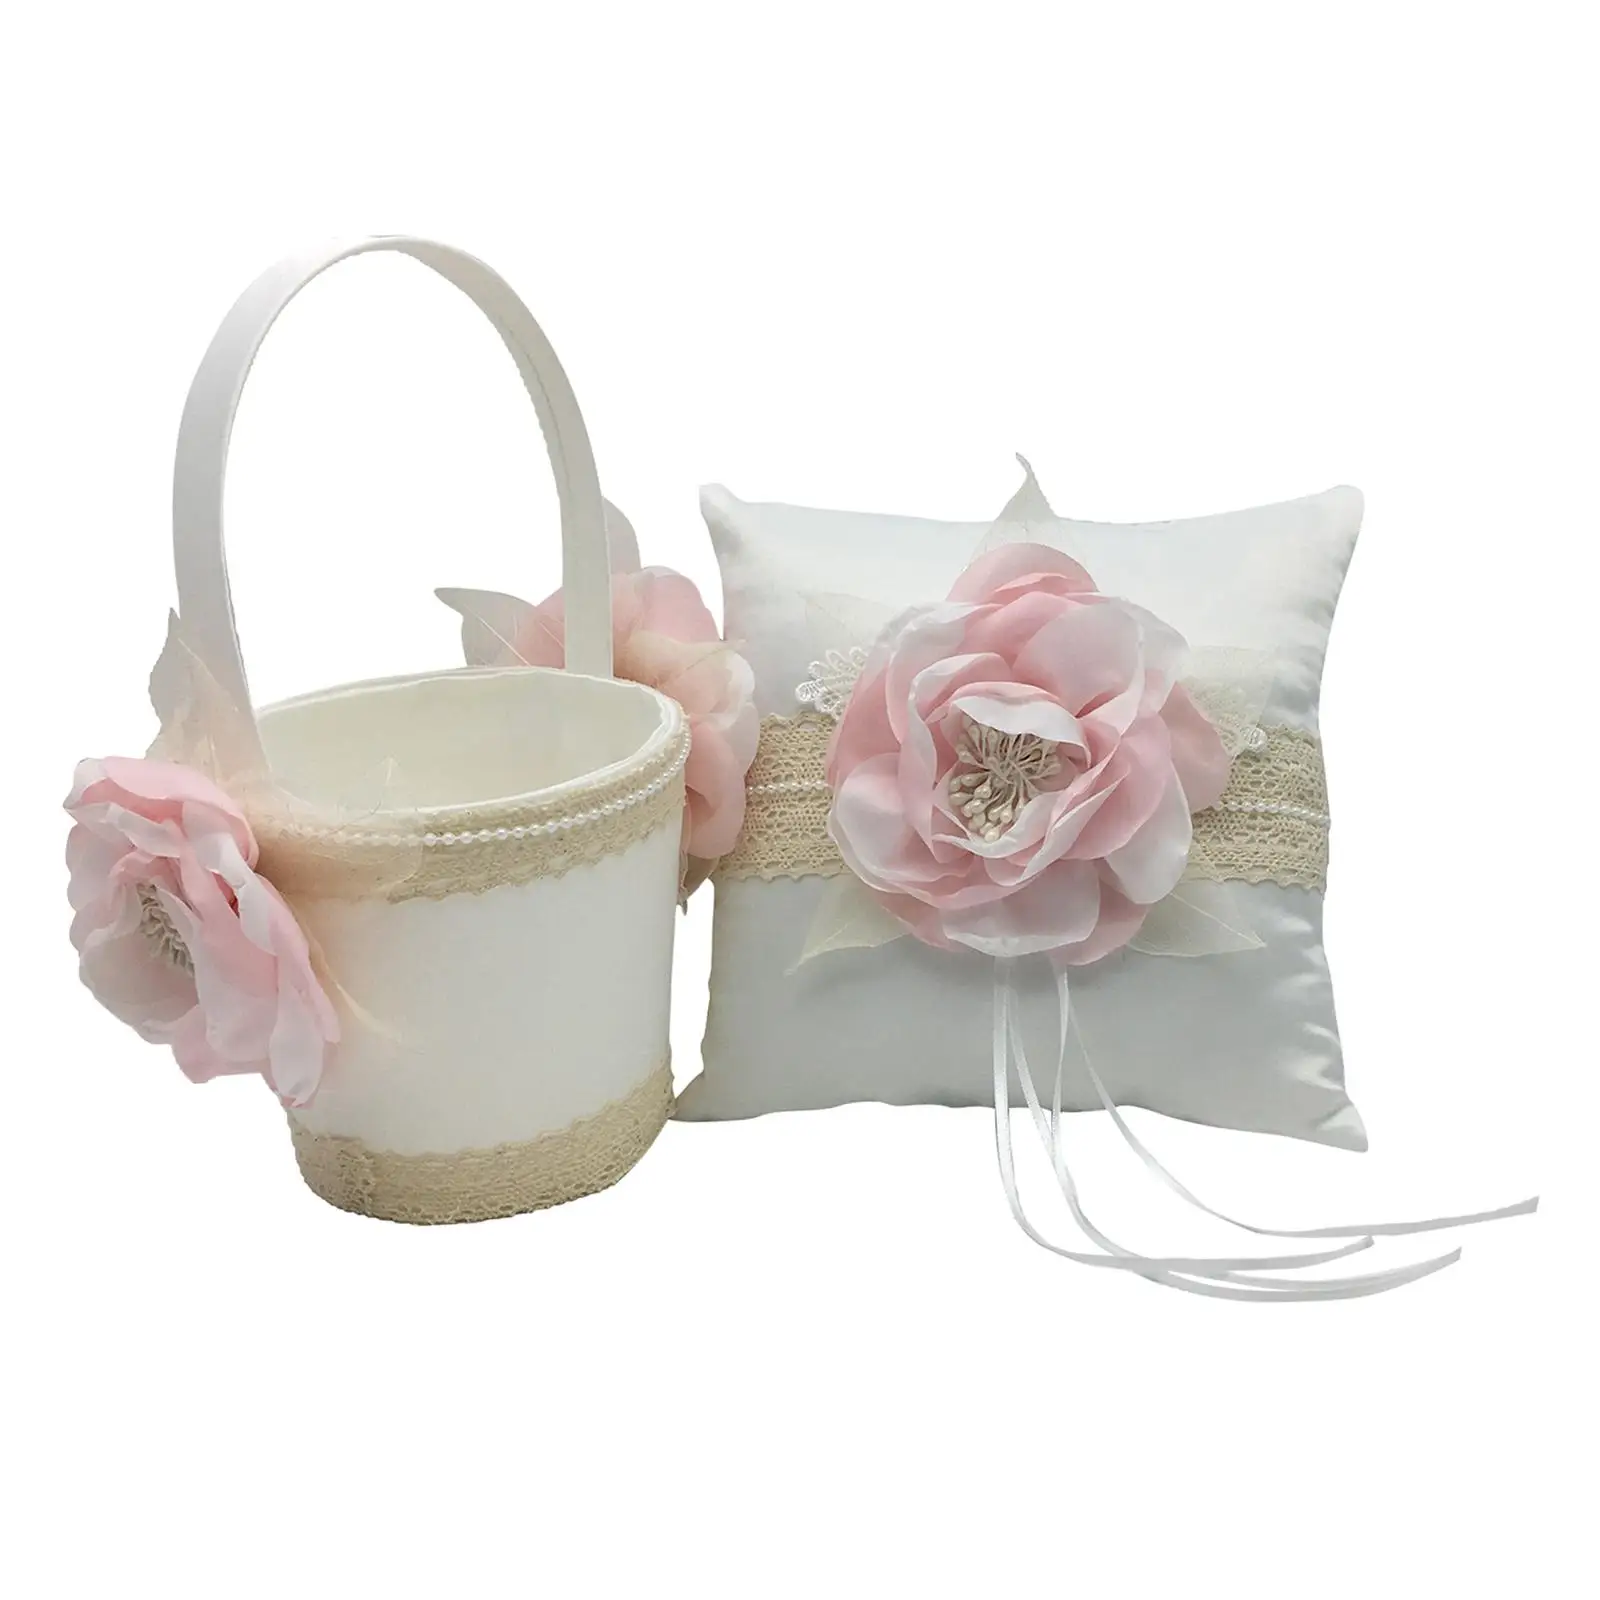 Chic Lace Wedding Flower Girl Basket & Vintage Hessian Ring Bearer Pillow Cushion Set for Wedding Party Bride Decoration